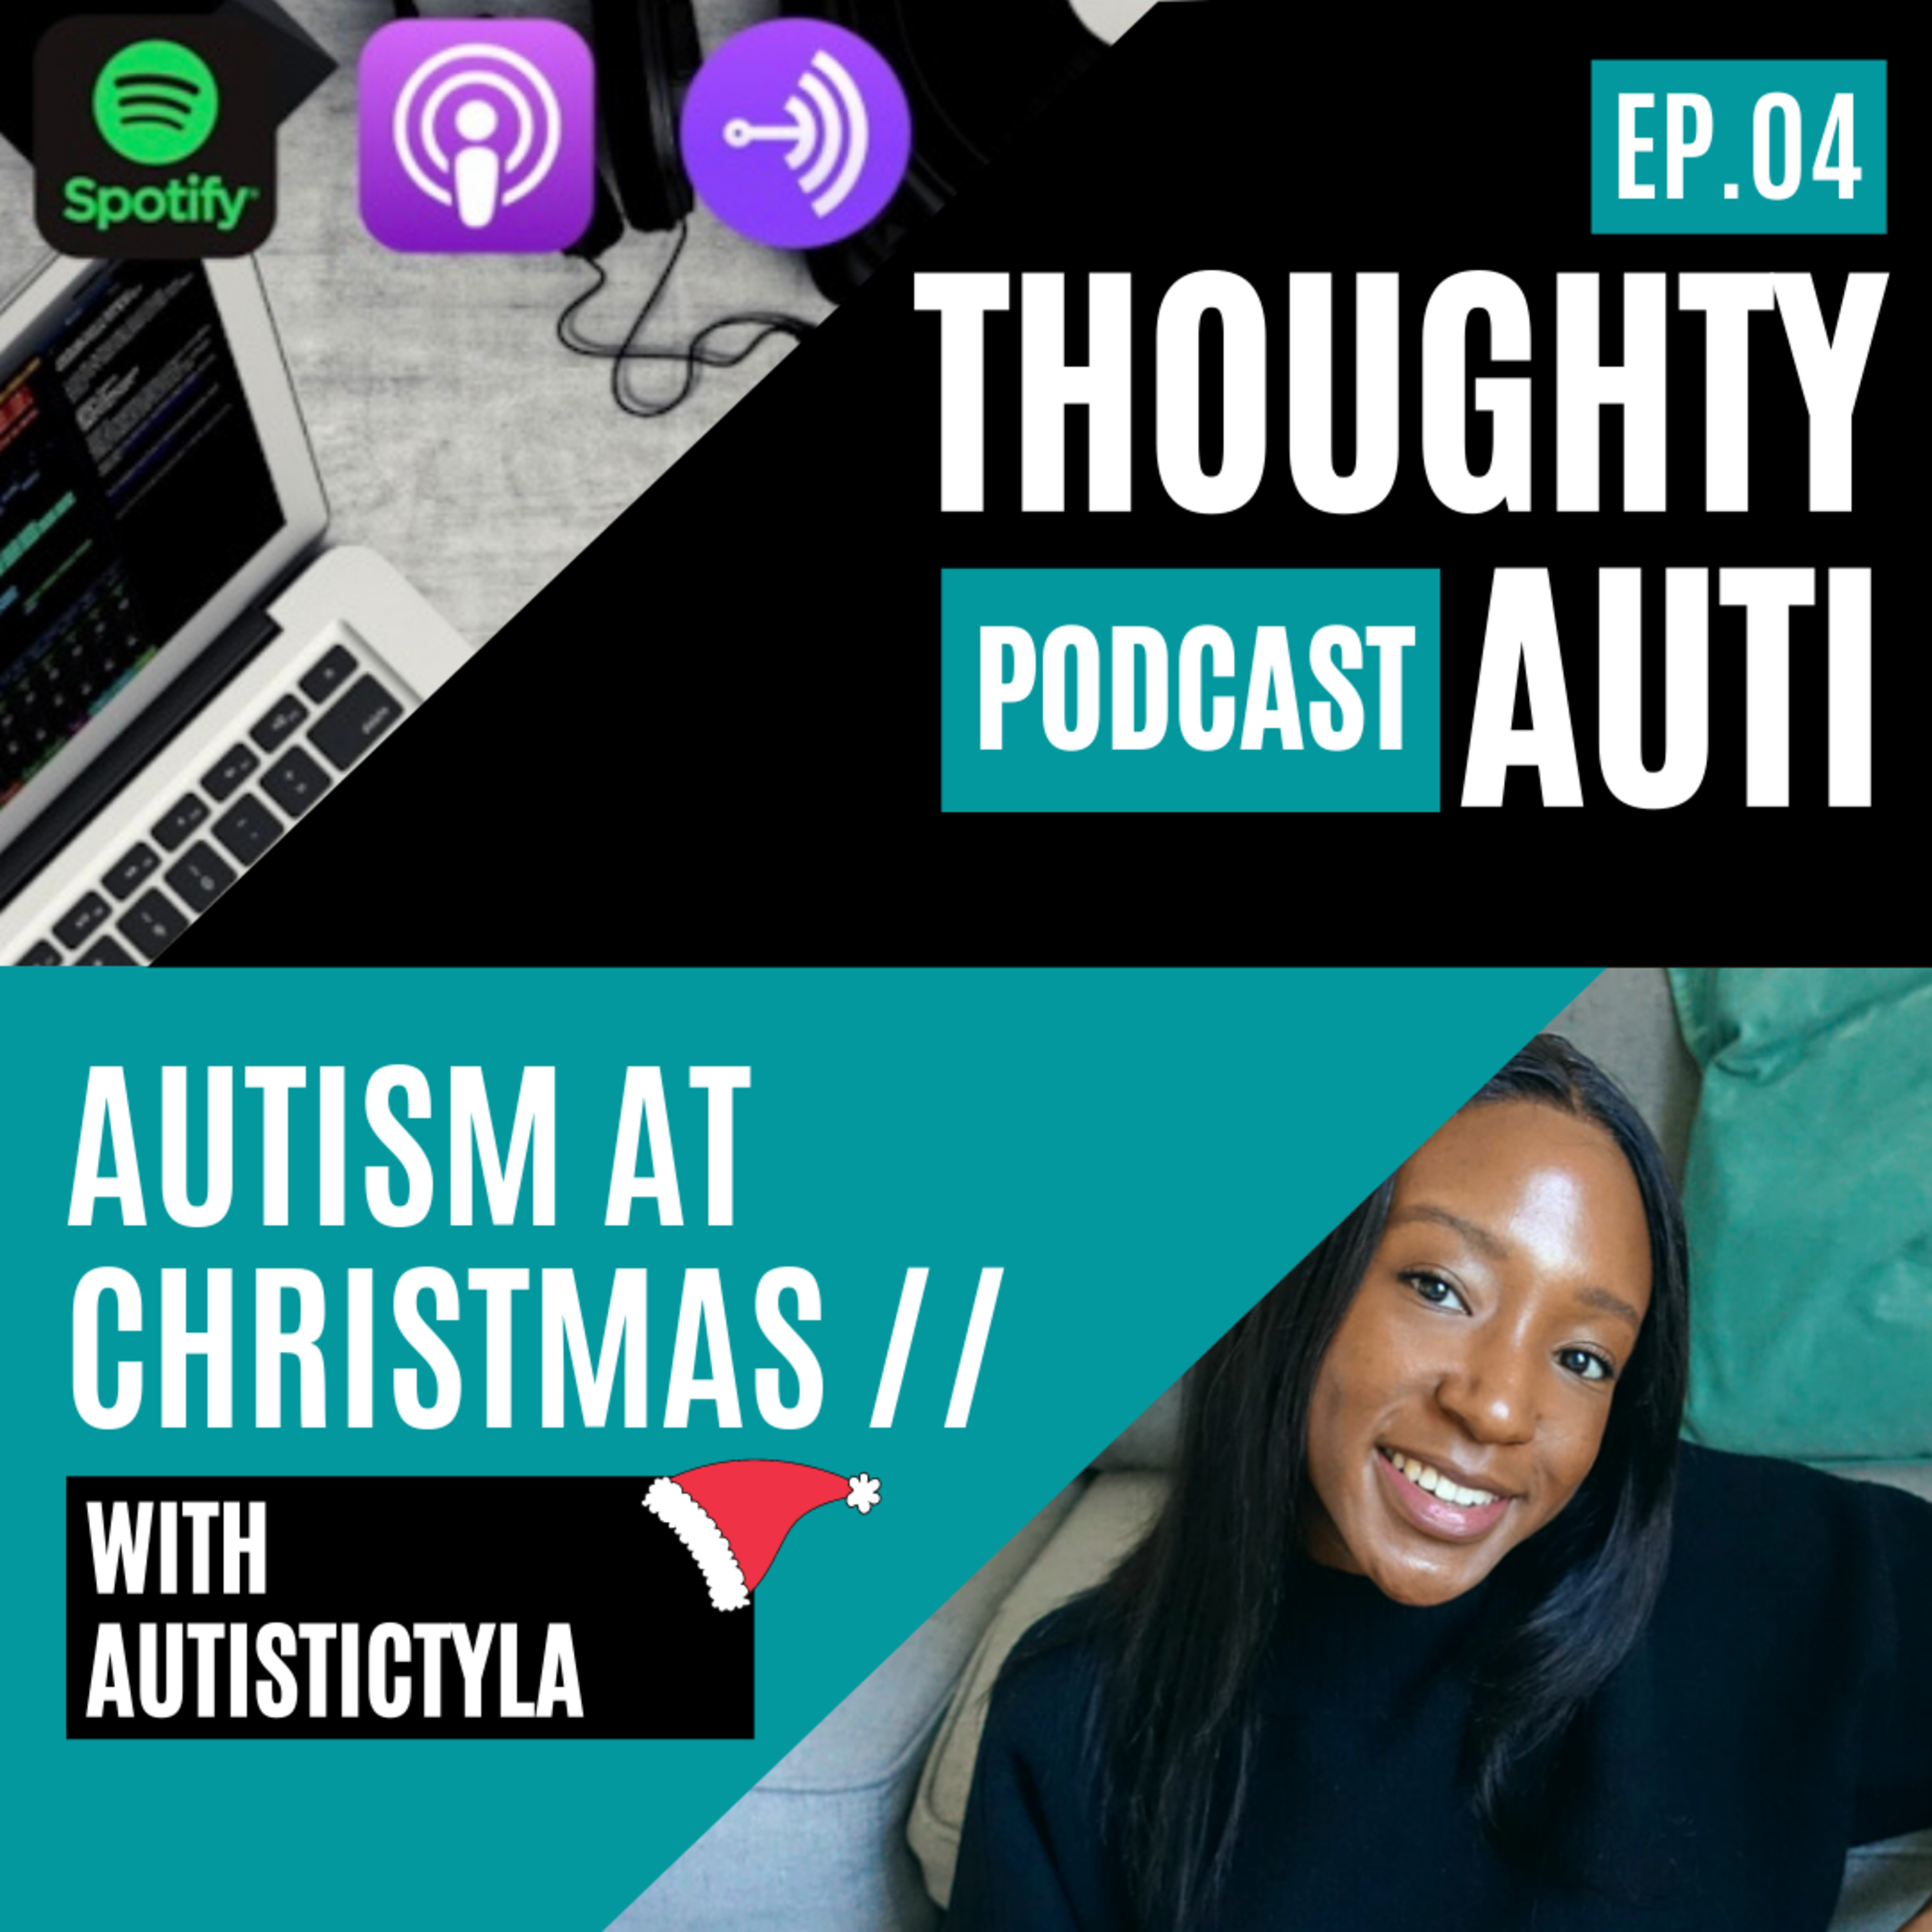 Autism At Christmas - Dealing with High Volume Social Events w/AutisticTyla